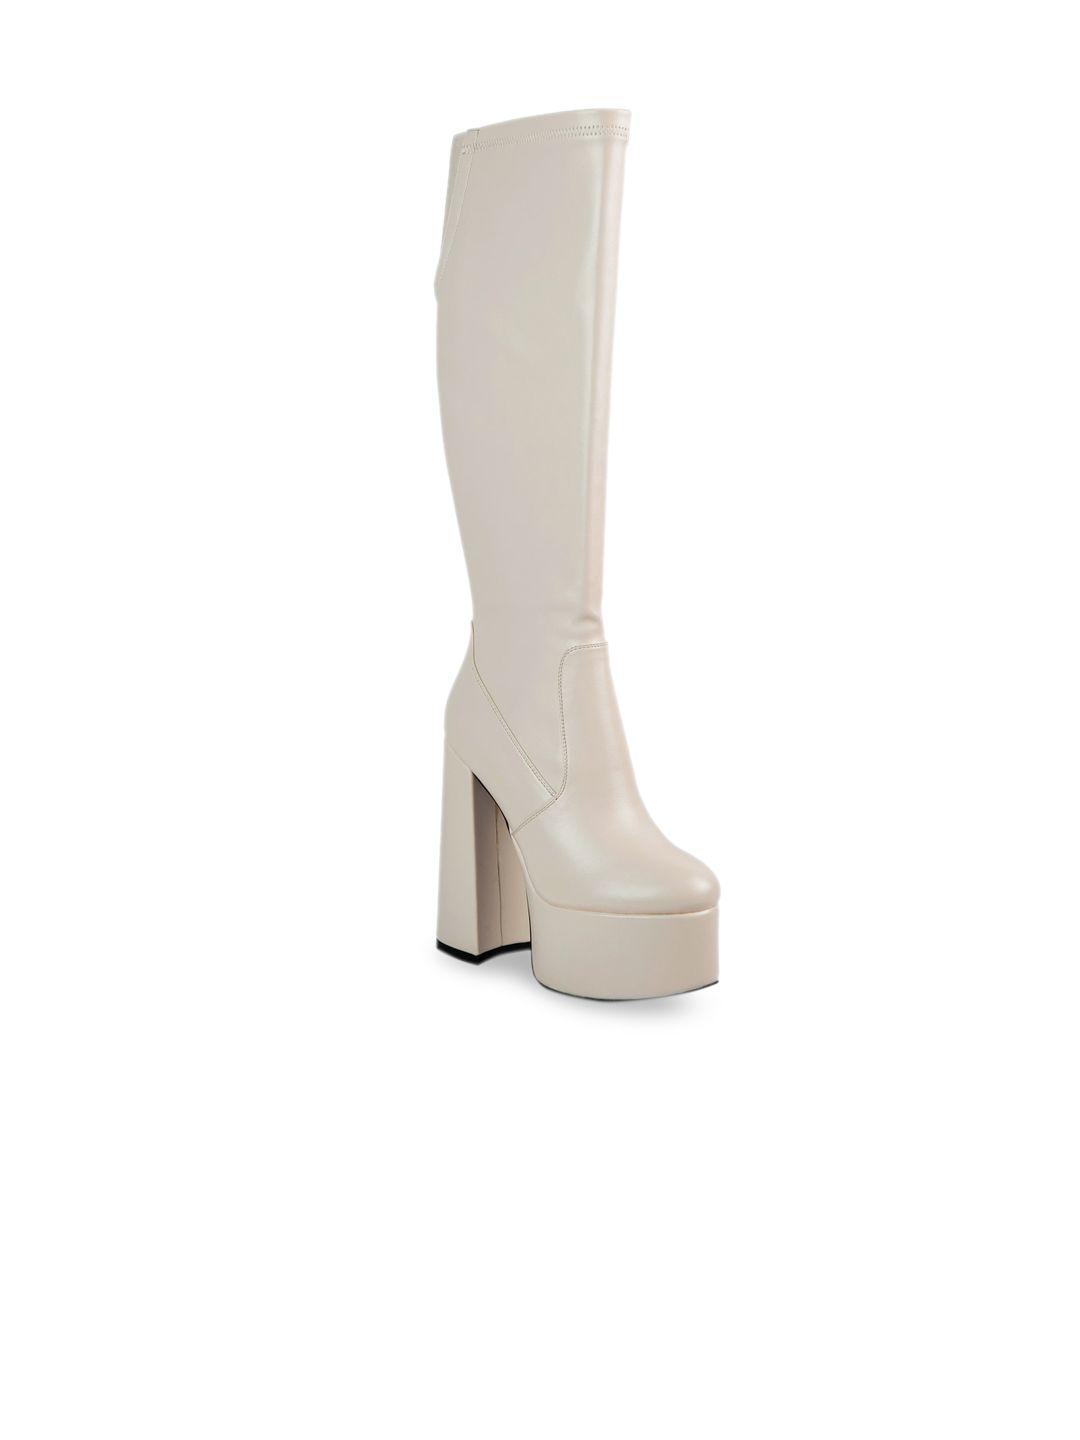 london rag women beige solid synthetic leather high block heeled calf boots